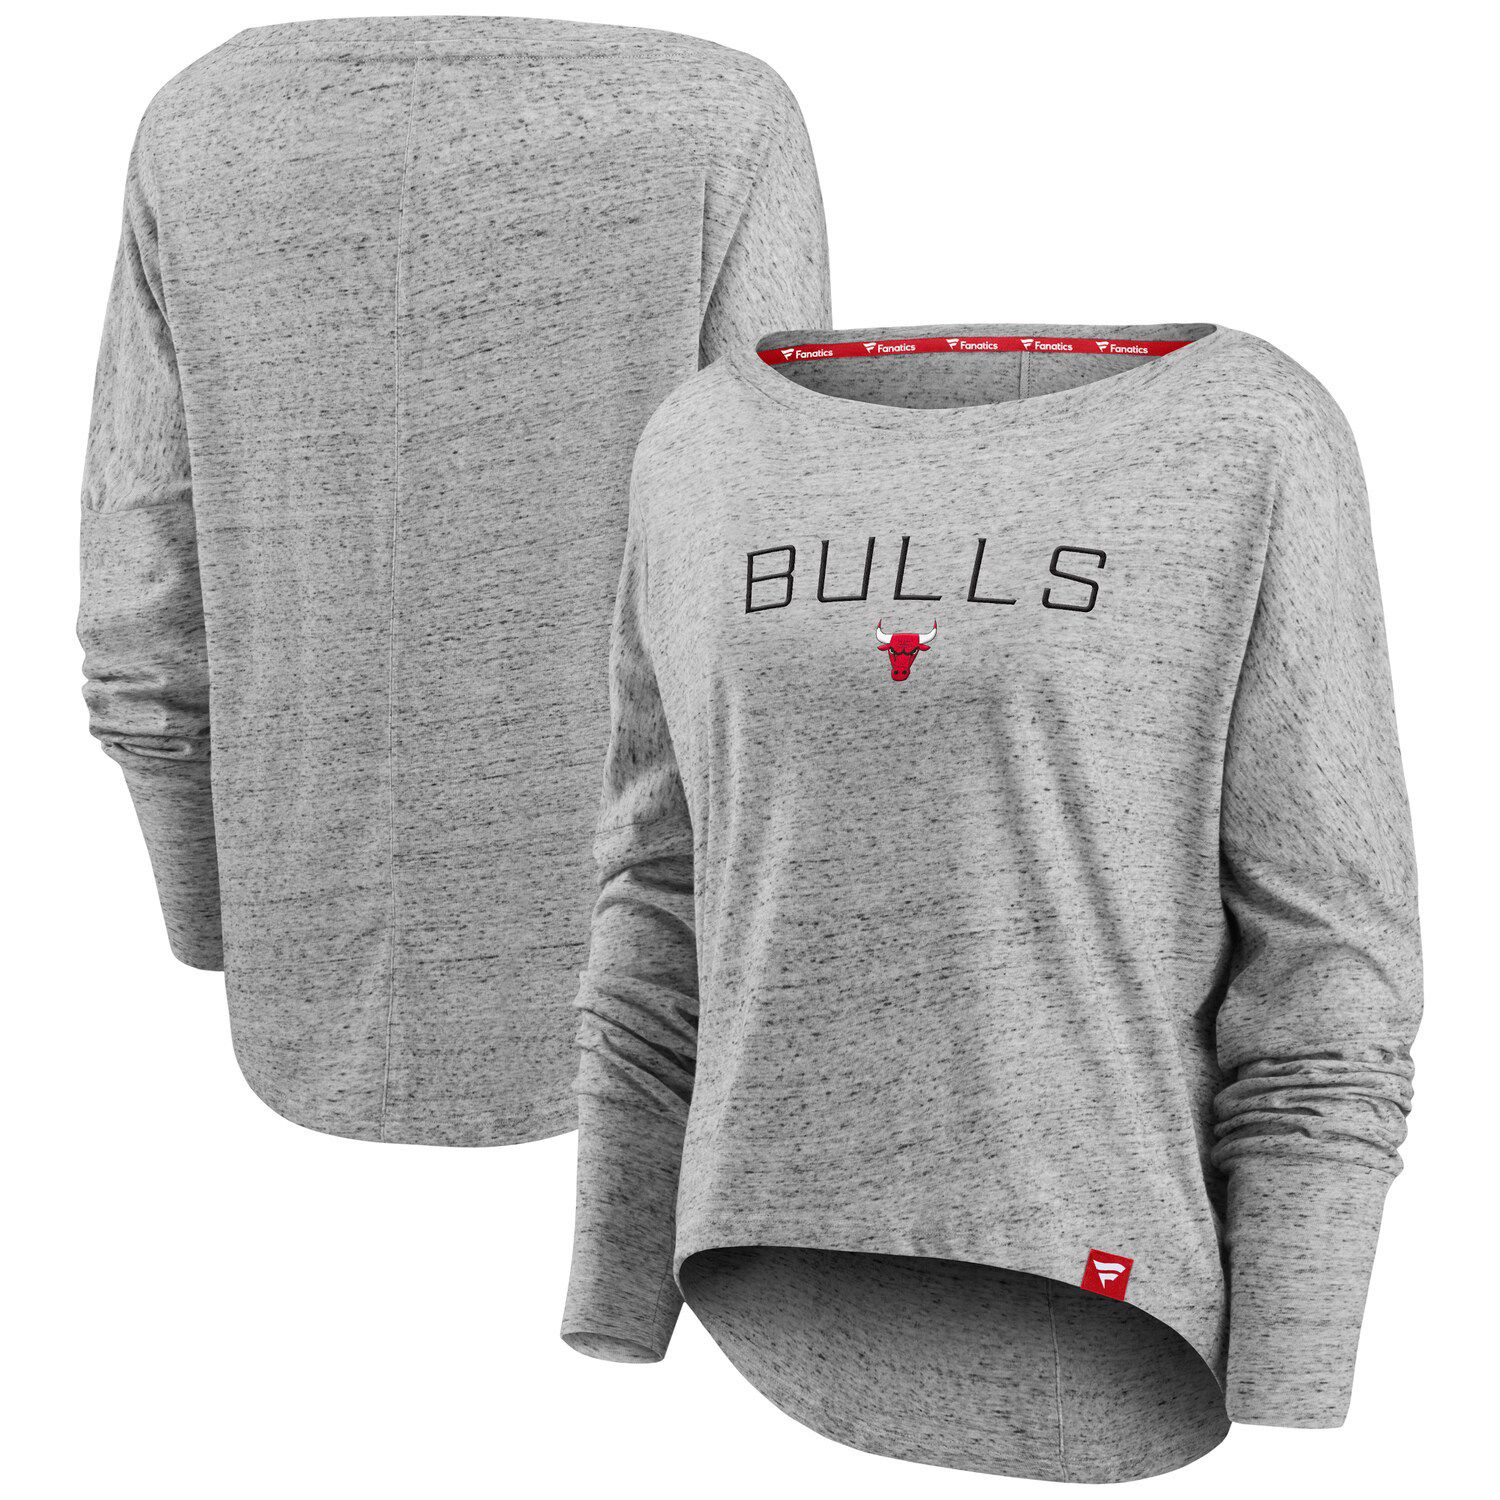 FANATICS Men's Fanatics Branded Heathered Red Chicago Bulls Where Legends  Play Iconic Practice Long Sleeve T-Shirt